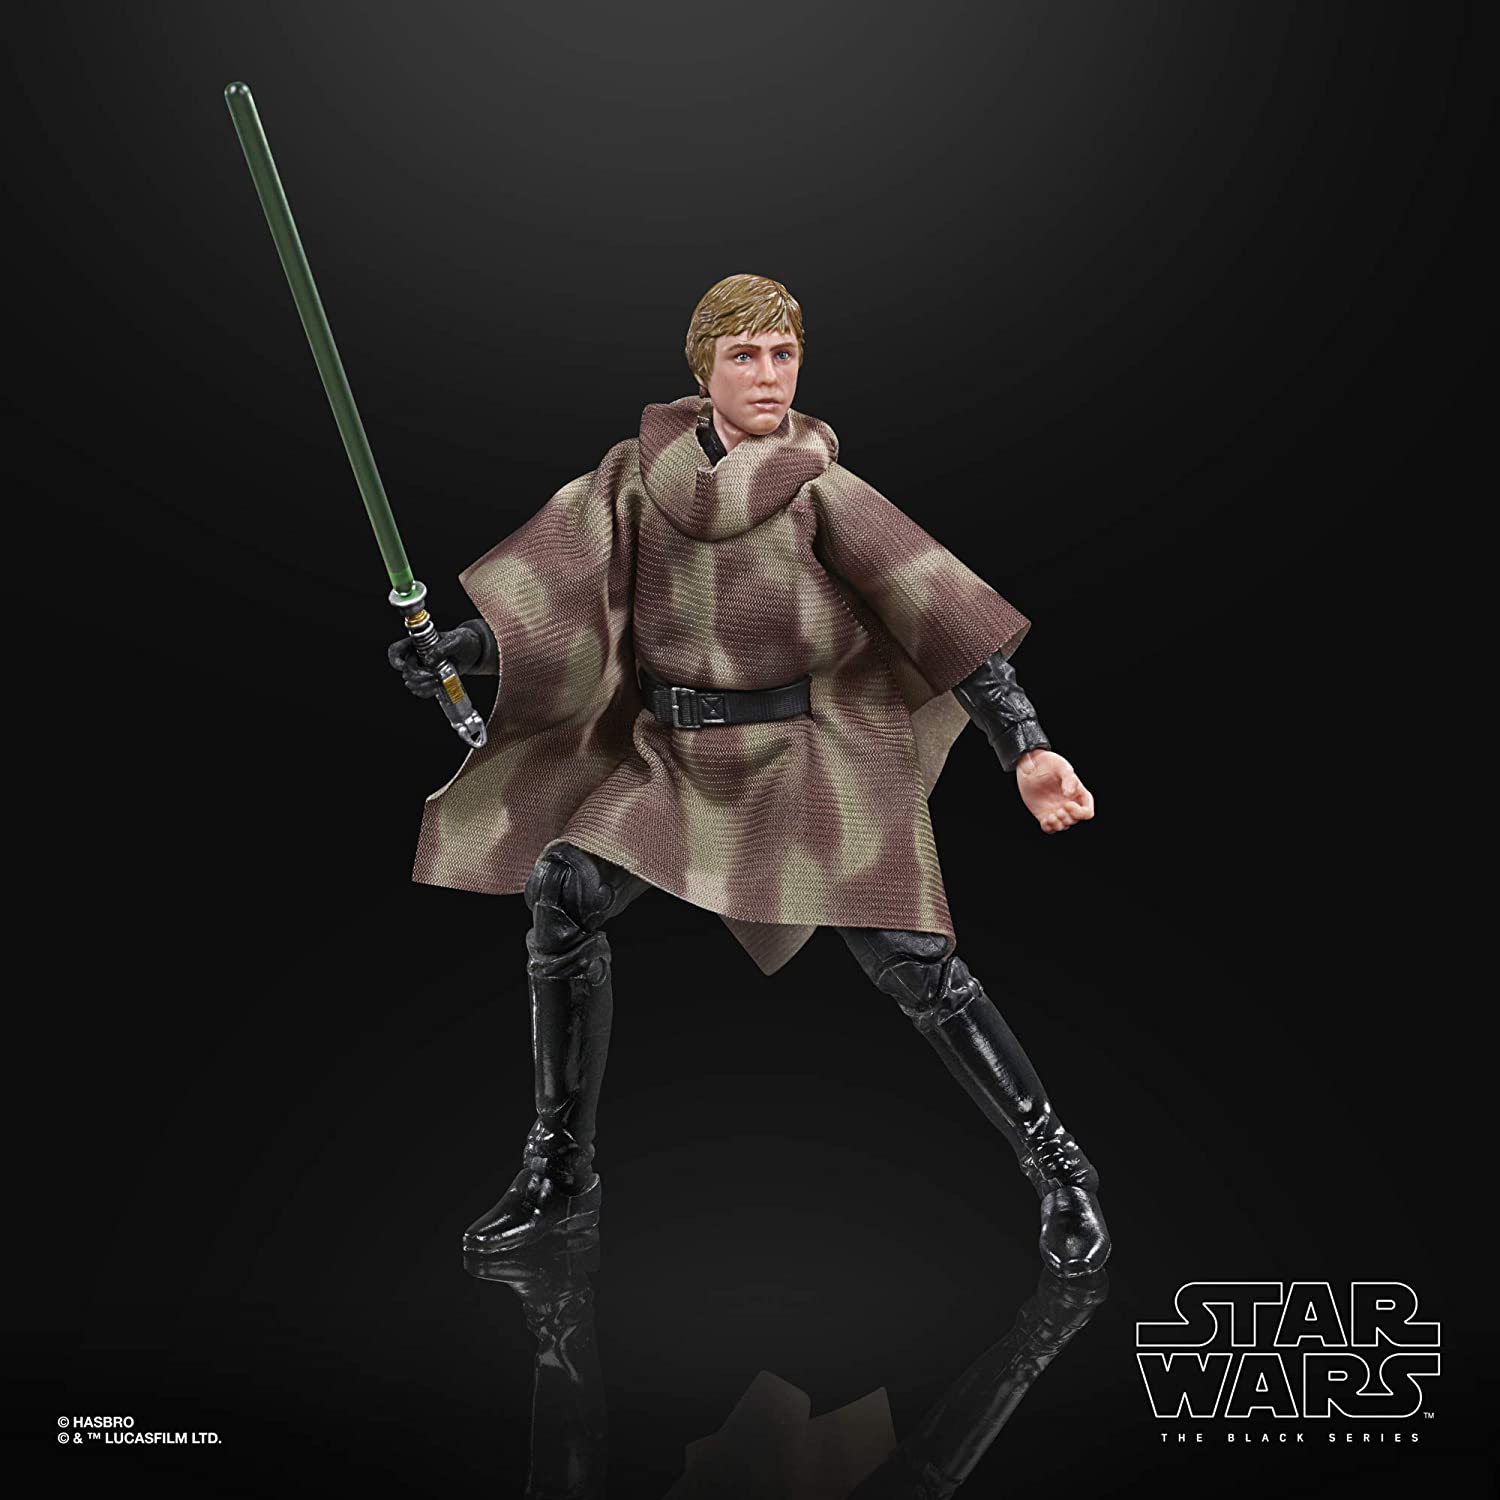 STAR WARS The Black Series Luke Skywalker (Endor) Toy 6-Inch Scale Return of The Jedi Collectible Figure